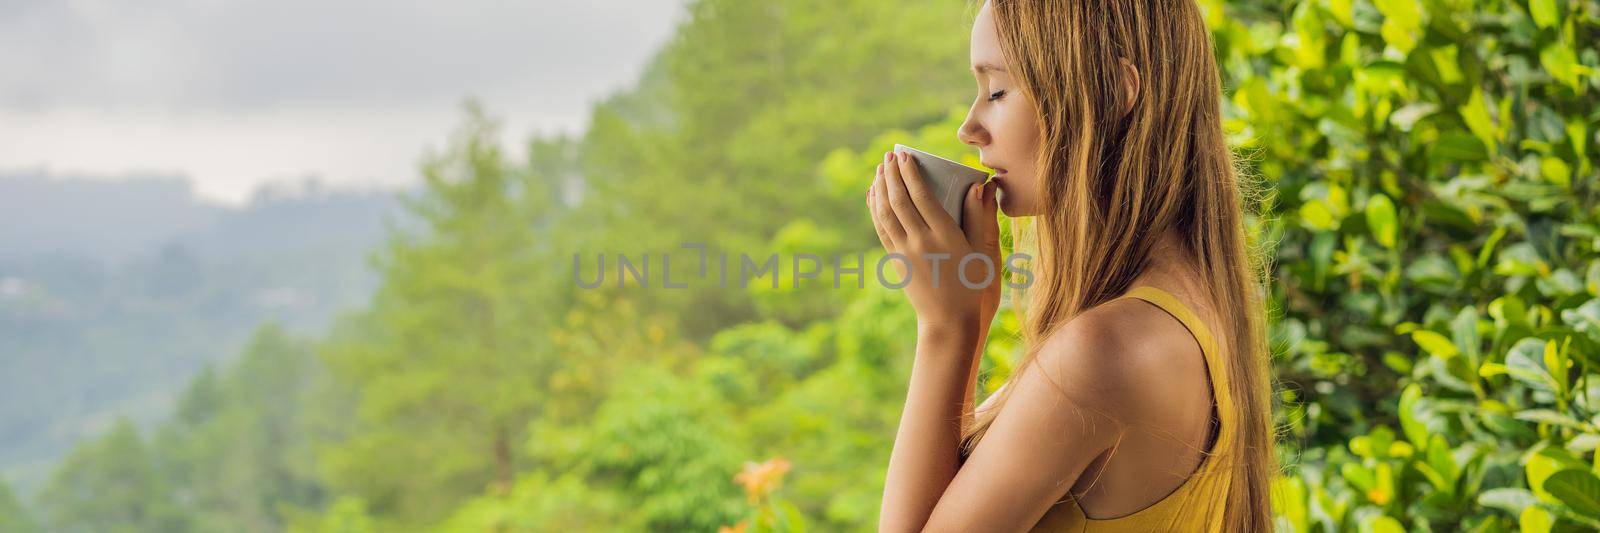 Young woman drinks coffee in a cafe in the mountains. BANNER, LONG FORMAT